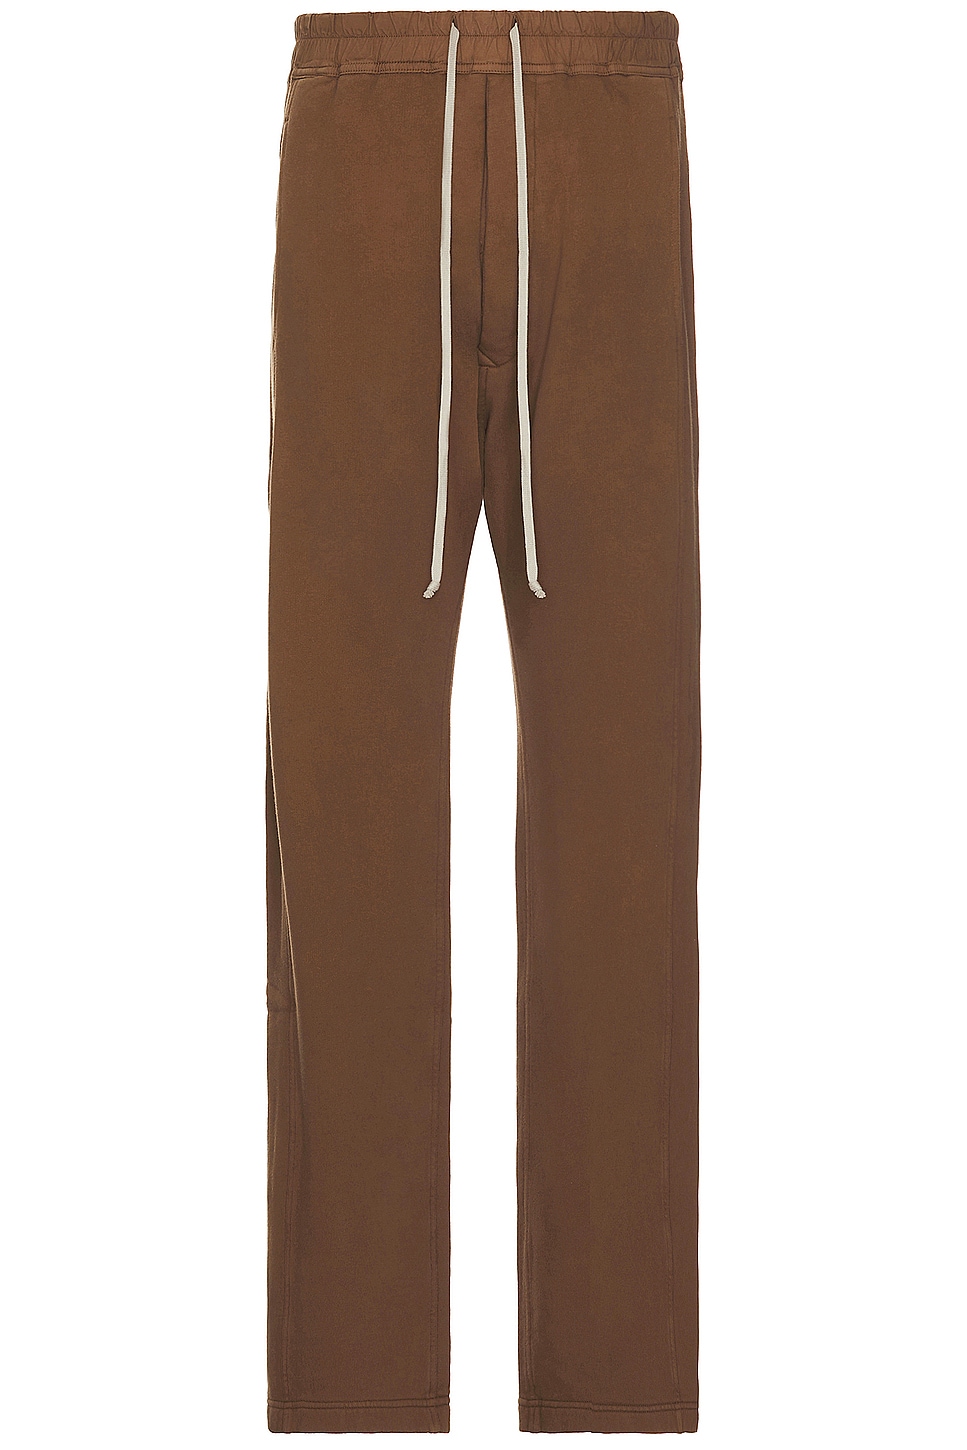 Pusher Pant in Nude